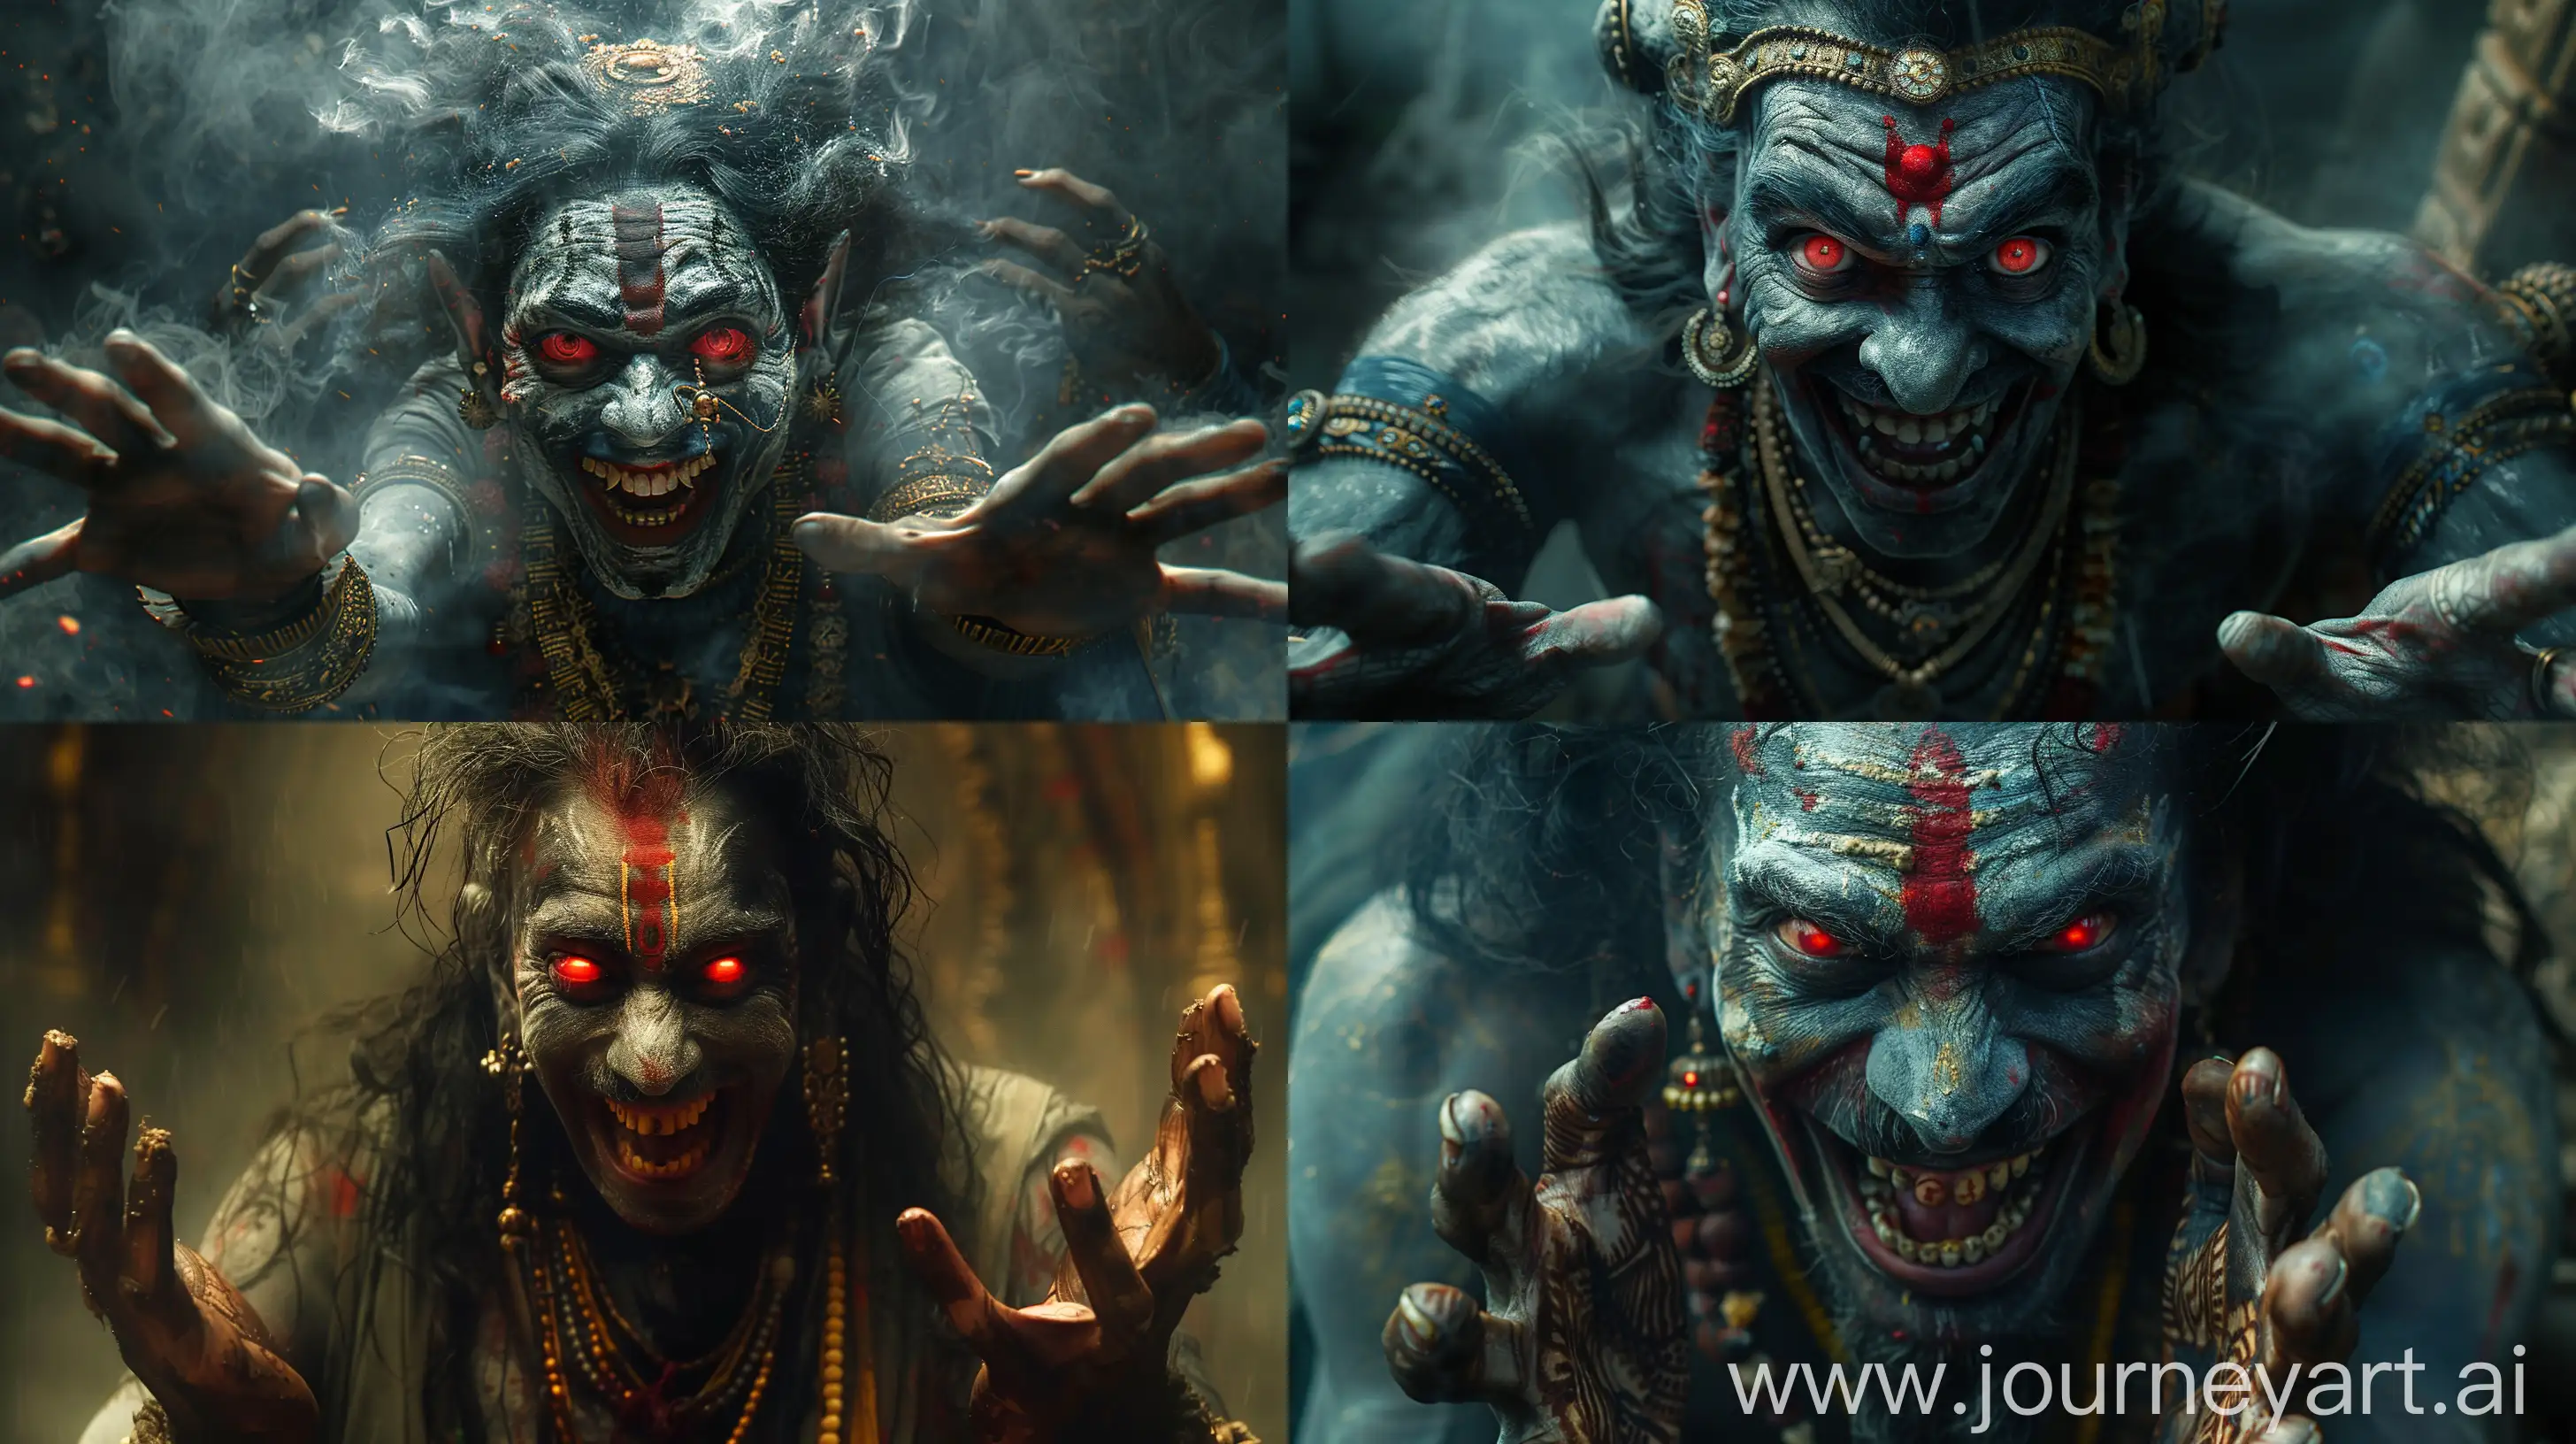 Malevolent-Ancient-Indian-Demon-with-Glowing-Red-Eyes